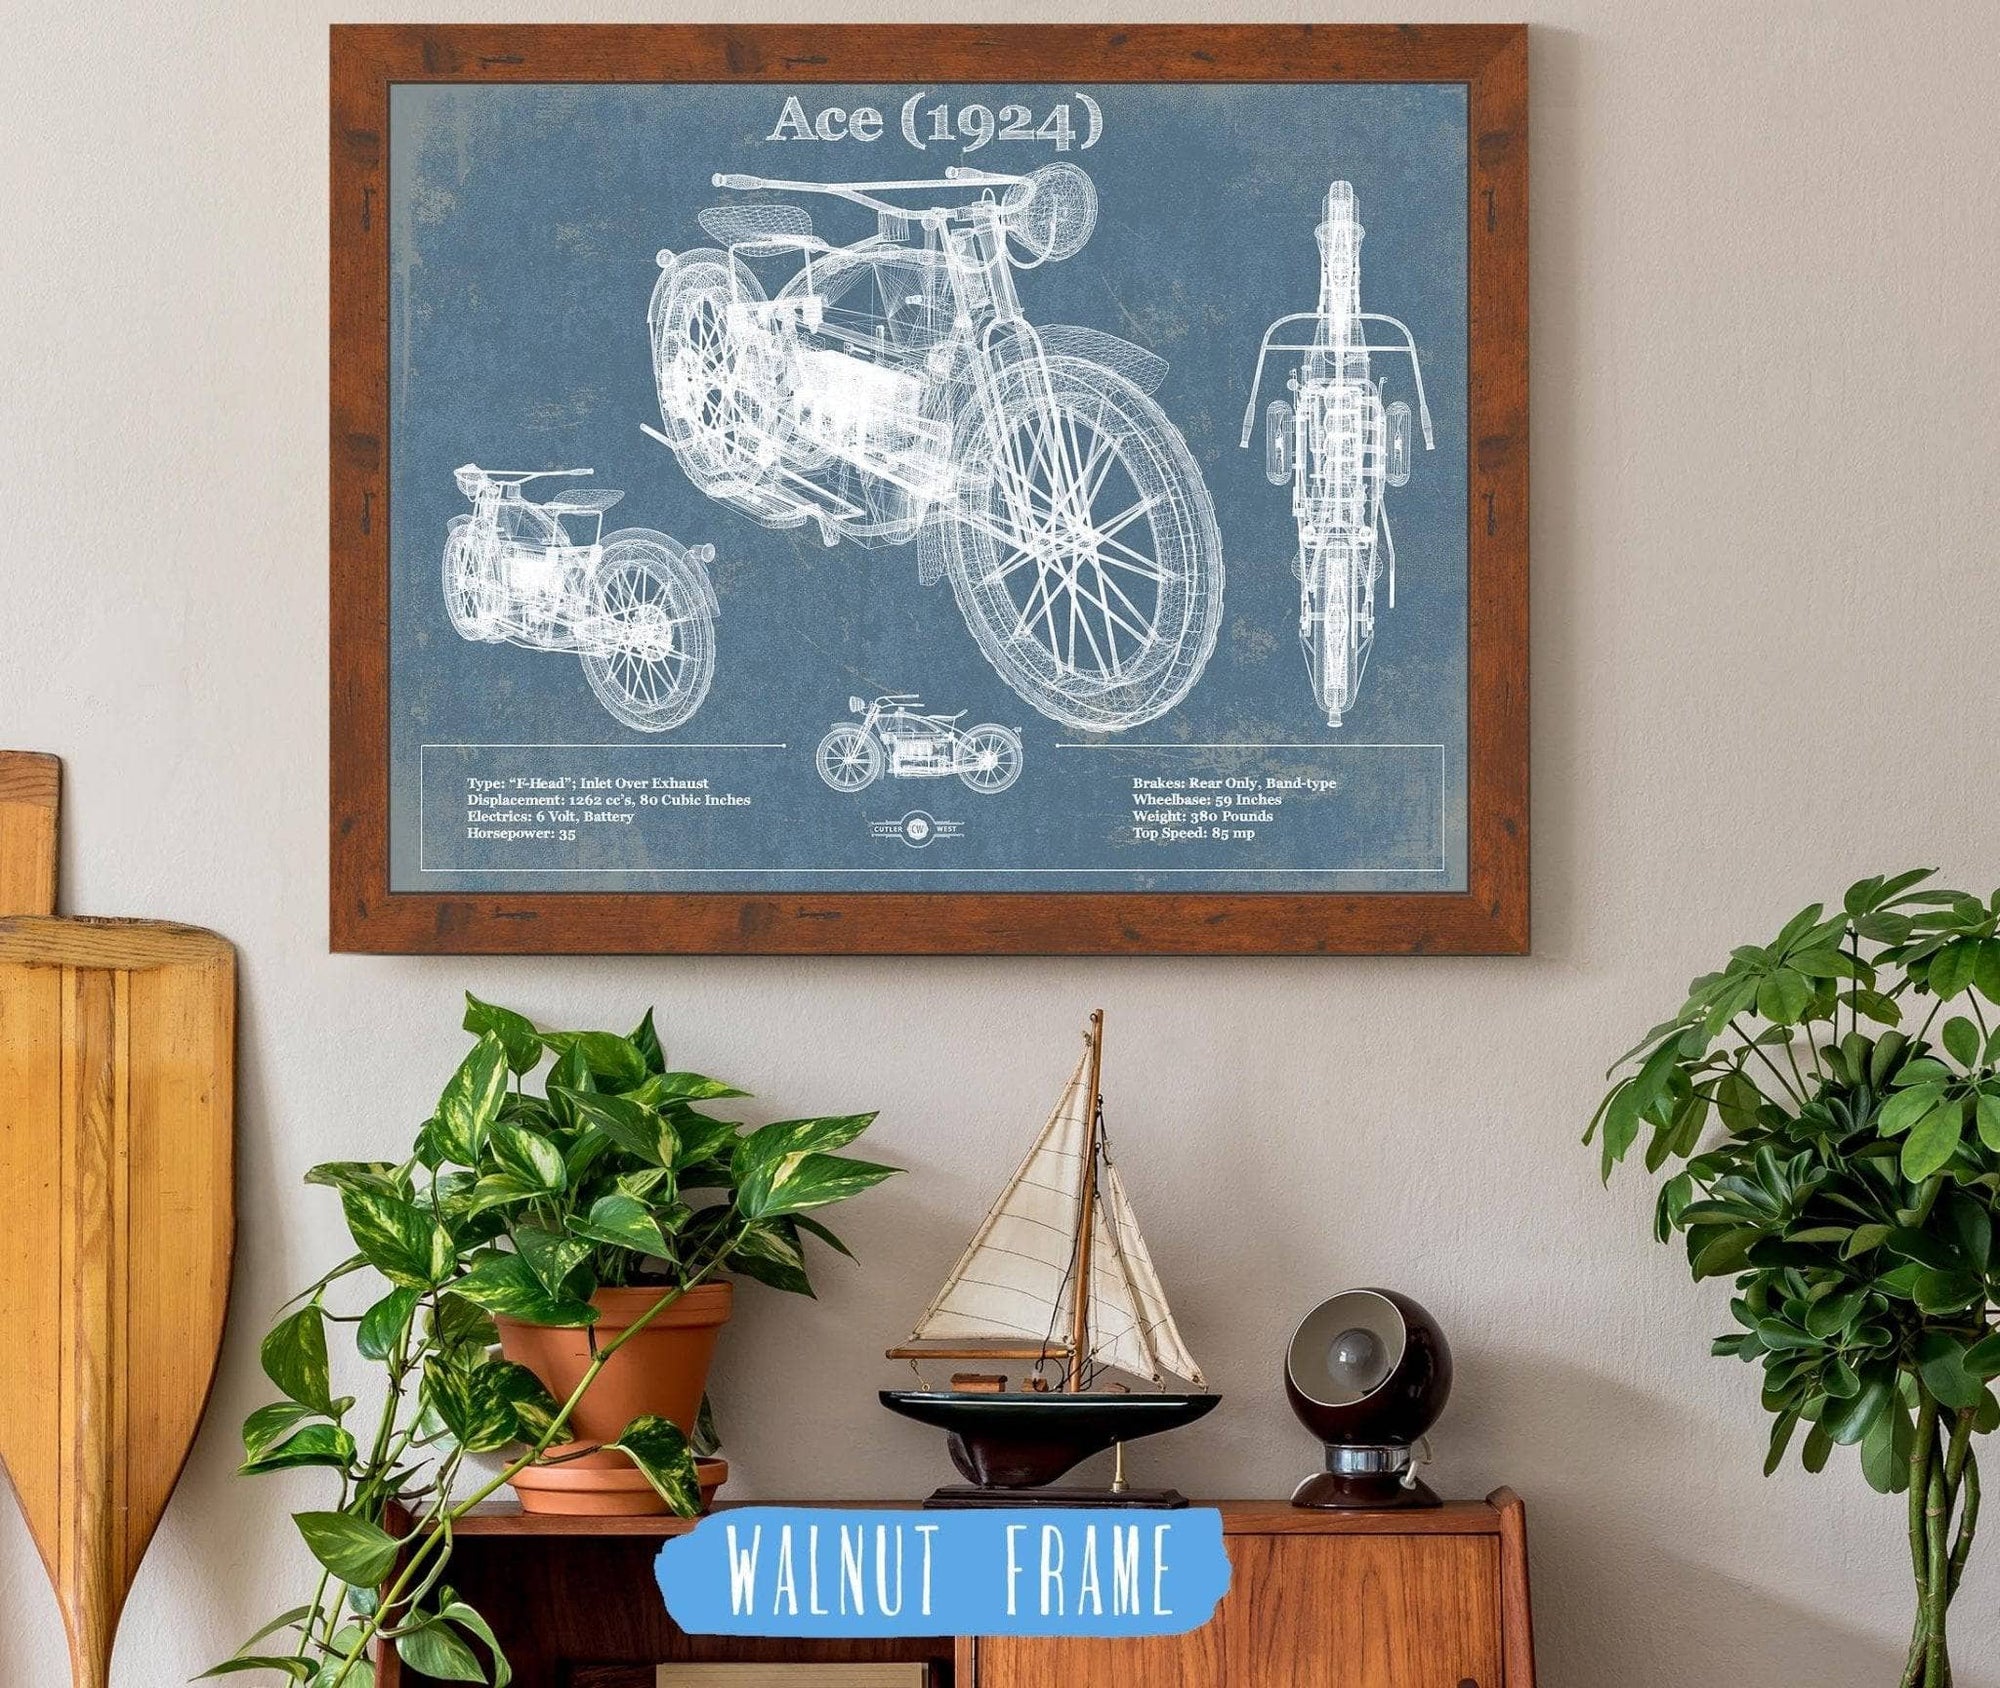 Cutler West Vehicle Collection 14" x 11" / Walnut Frame Ace (1924) Blueprint Motorcycle Patent Print 833110074_38906